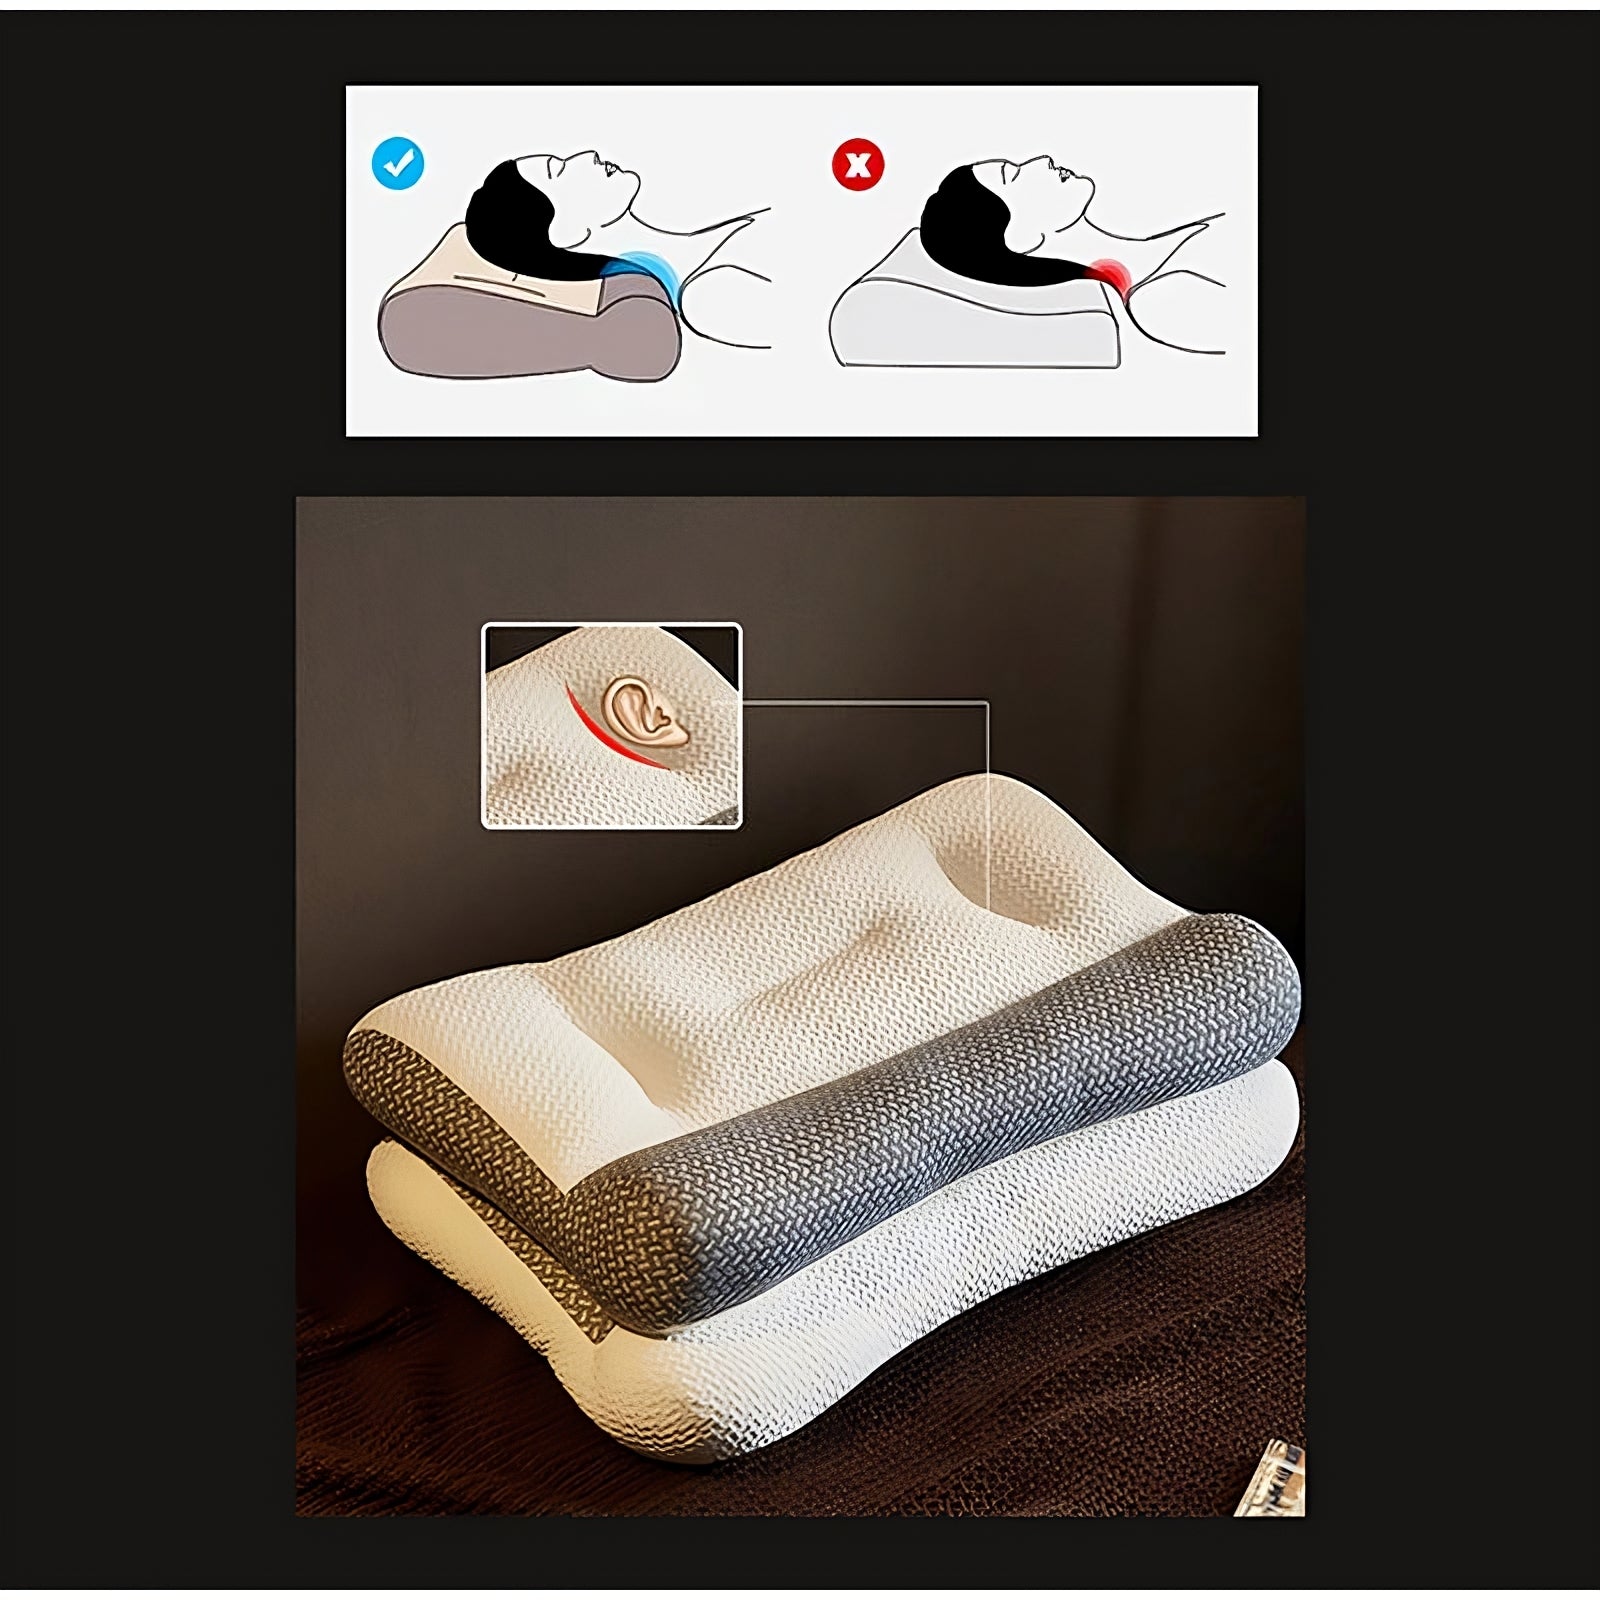 Last Day Promotion 70% OFF - 🔥Super Ergonomic Pillow - Protect your neck and spine